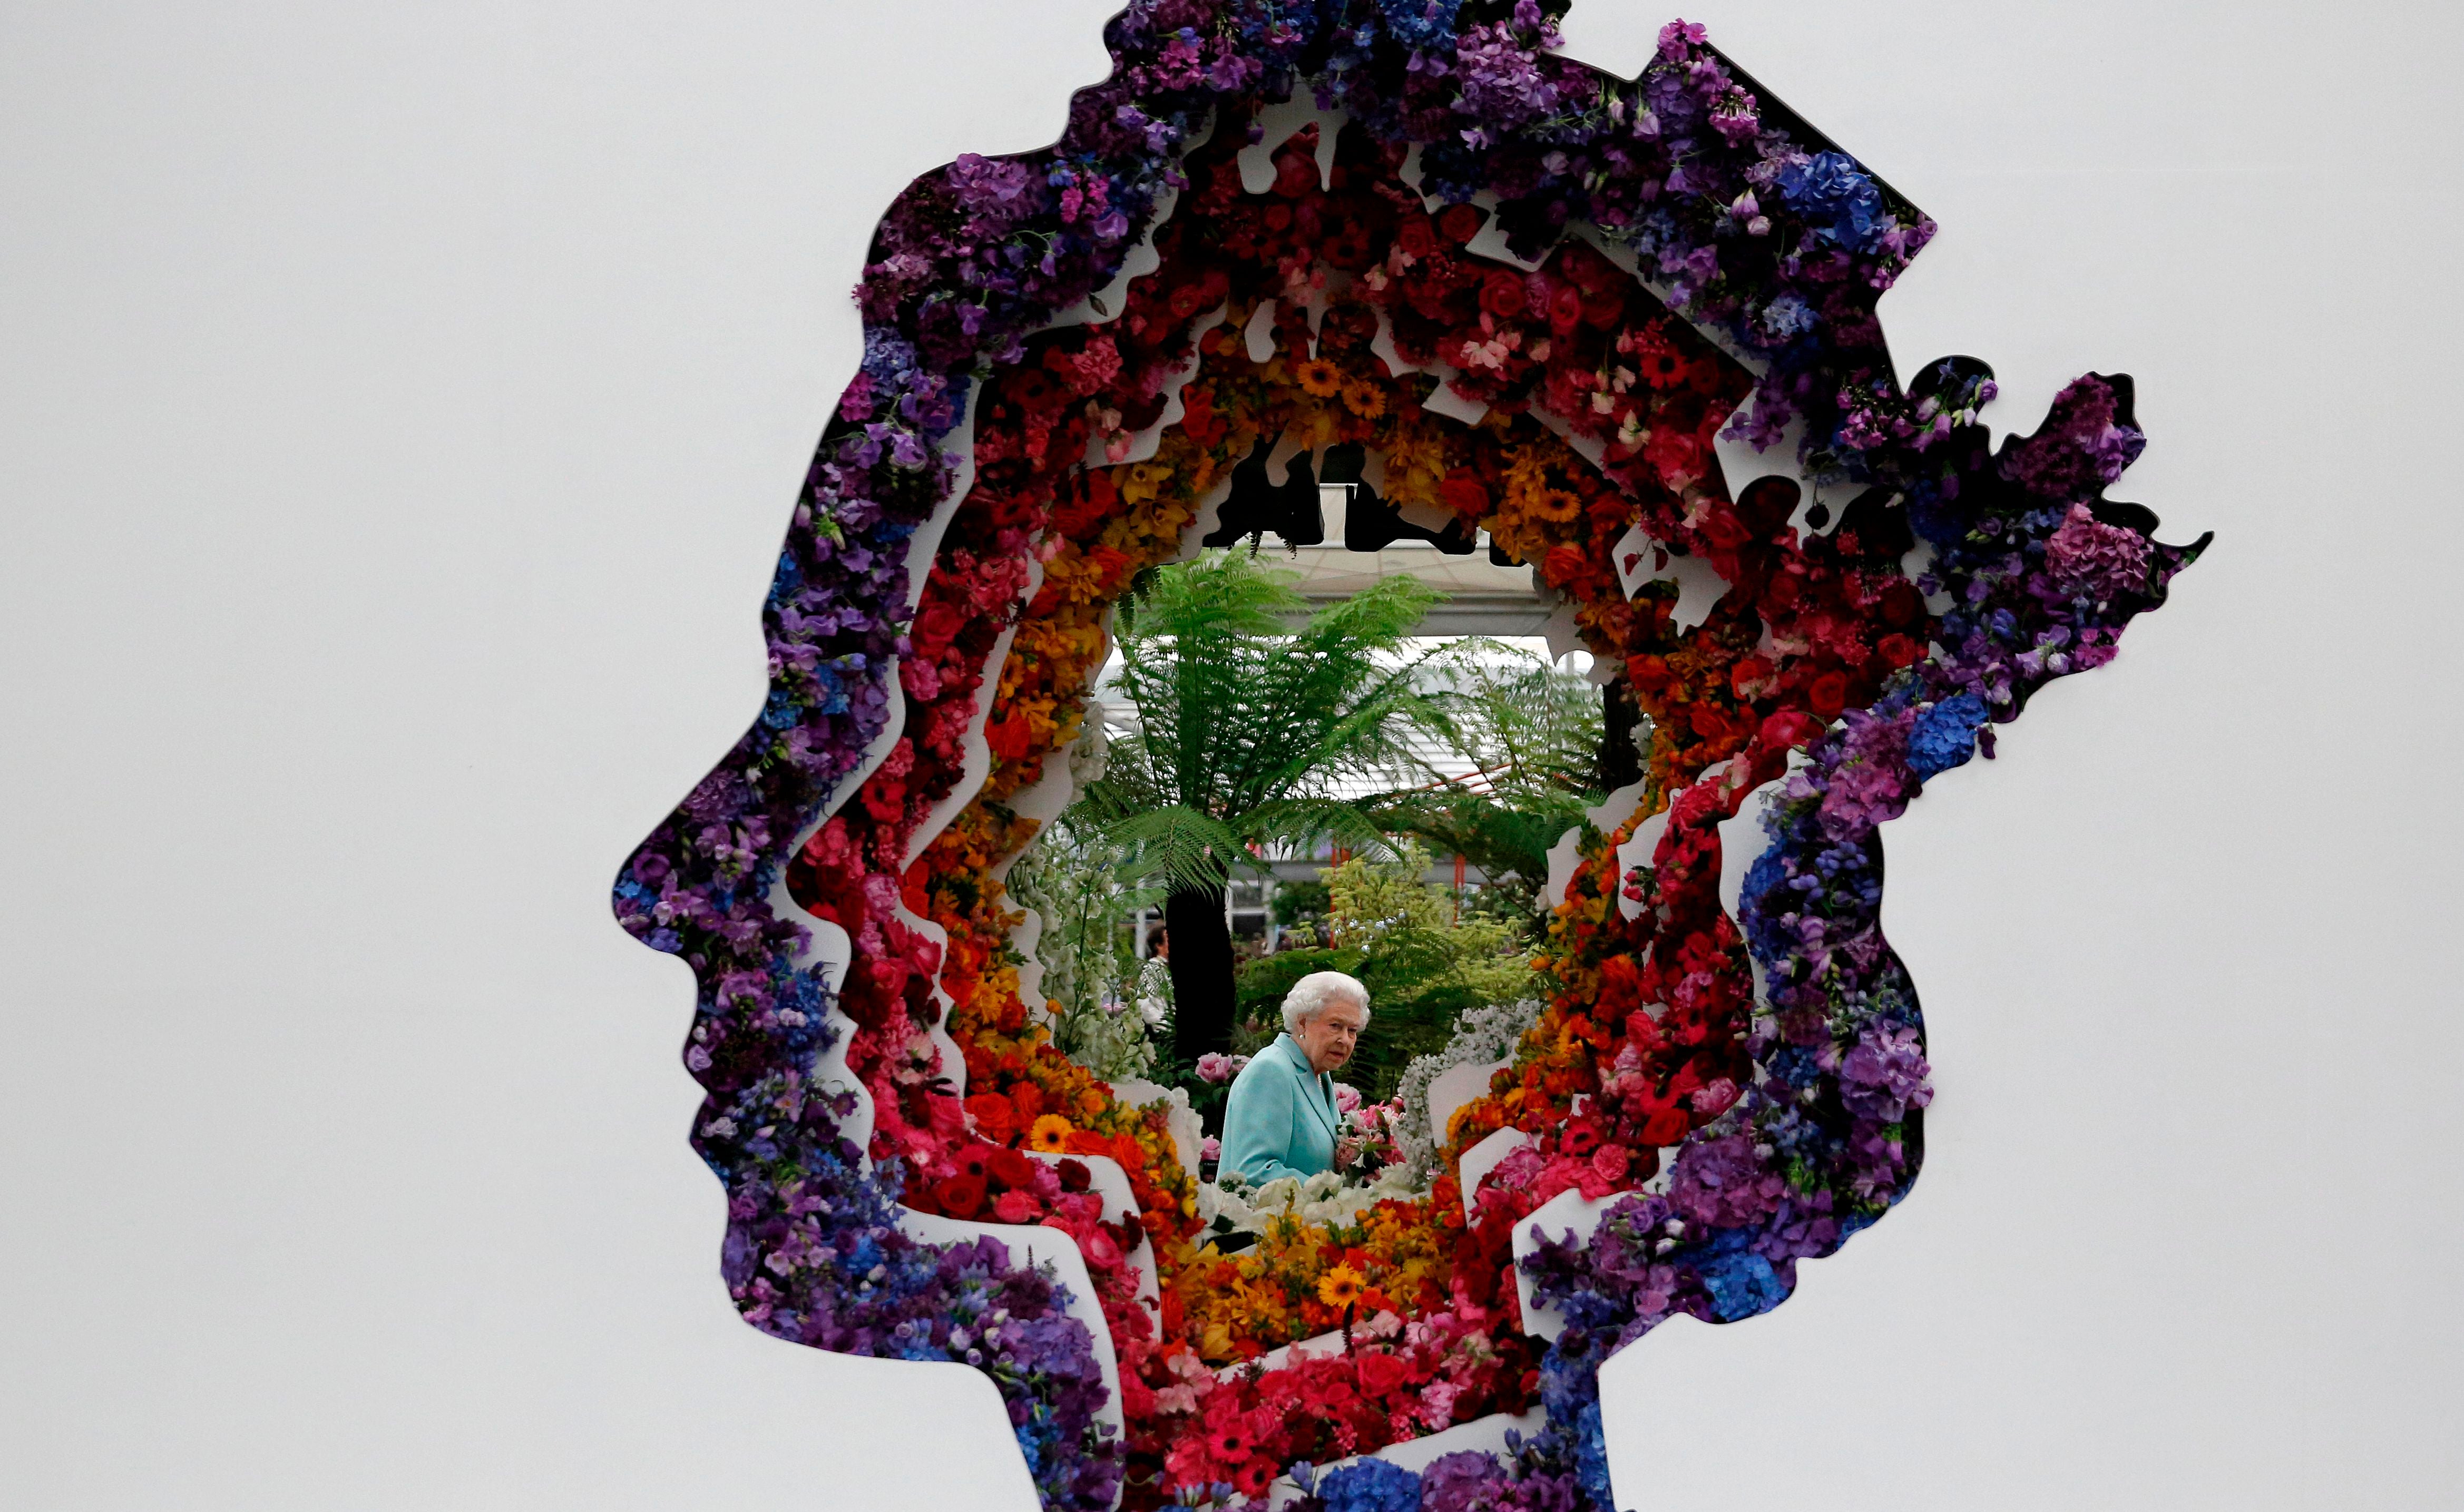 Queen Elizabeth II pictured through a gap in a floral exhibit by the New Covent Garden Flower Market, which features an image of the Queen, during a visit to the 2016 Chelsea Flower Show